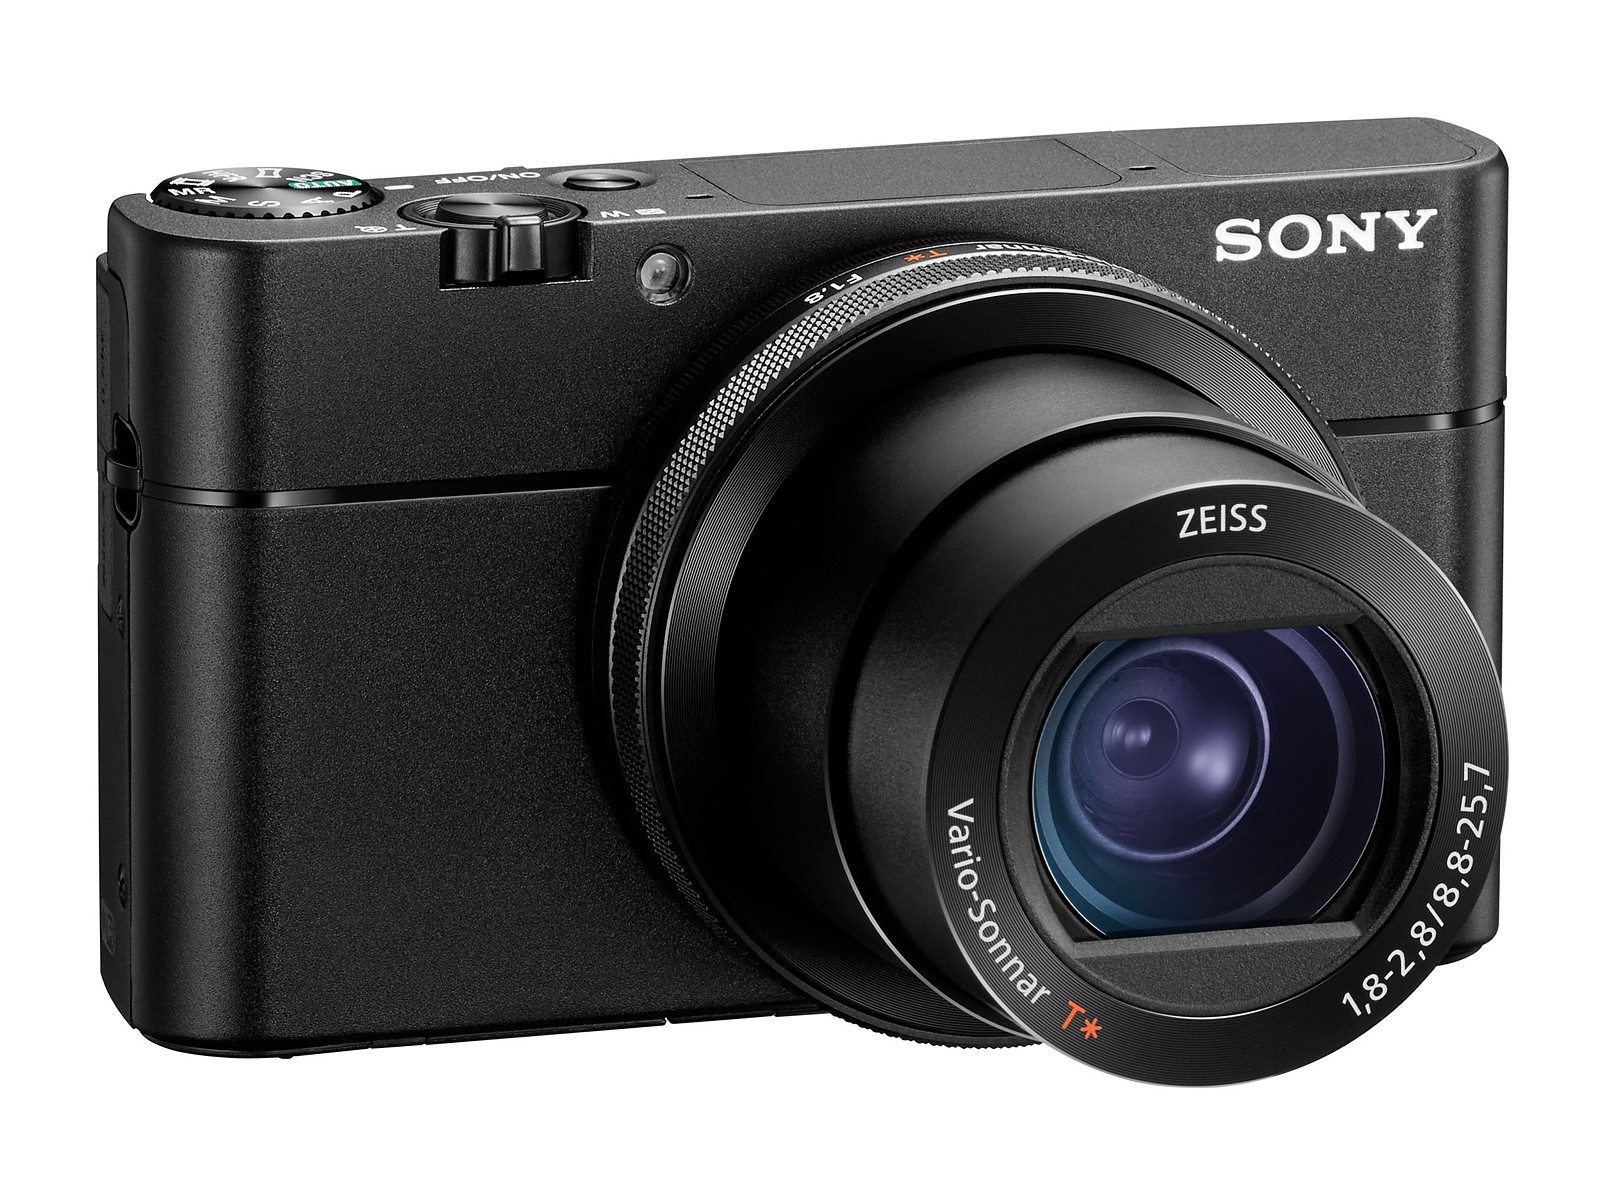 Sony RX100 V officially announced with 315 phase-detection AF points